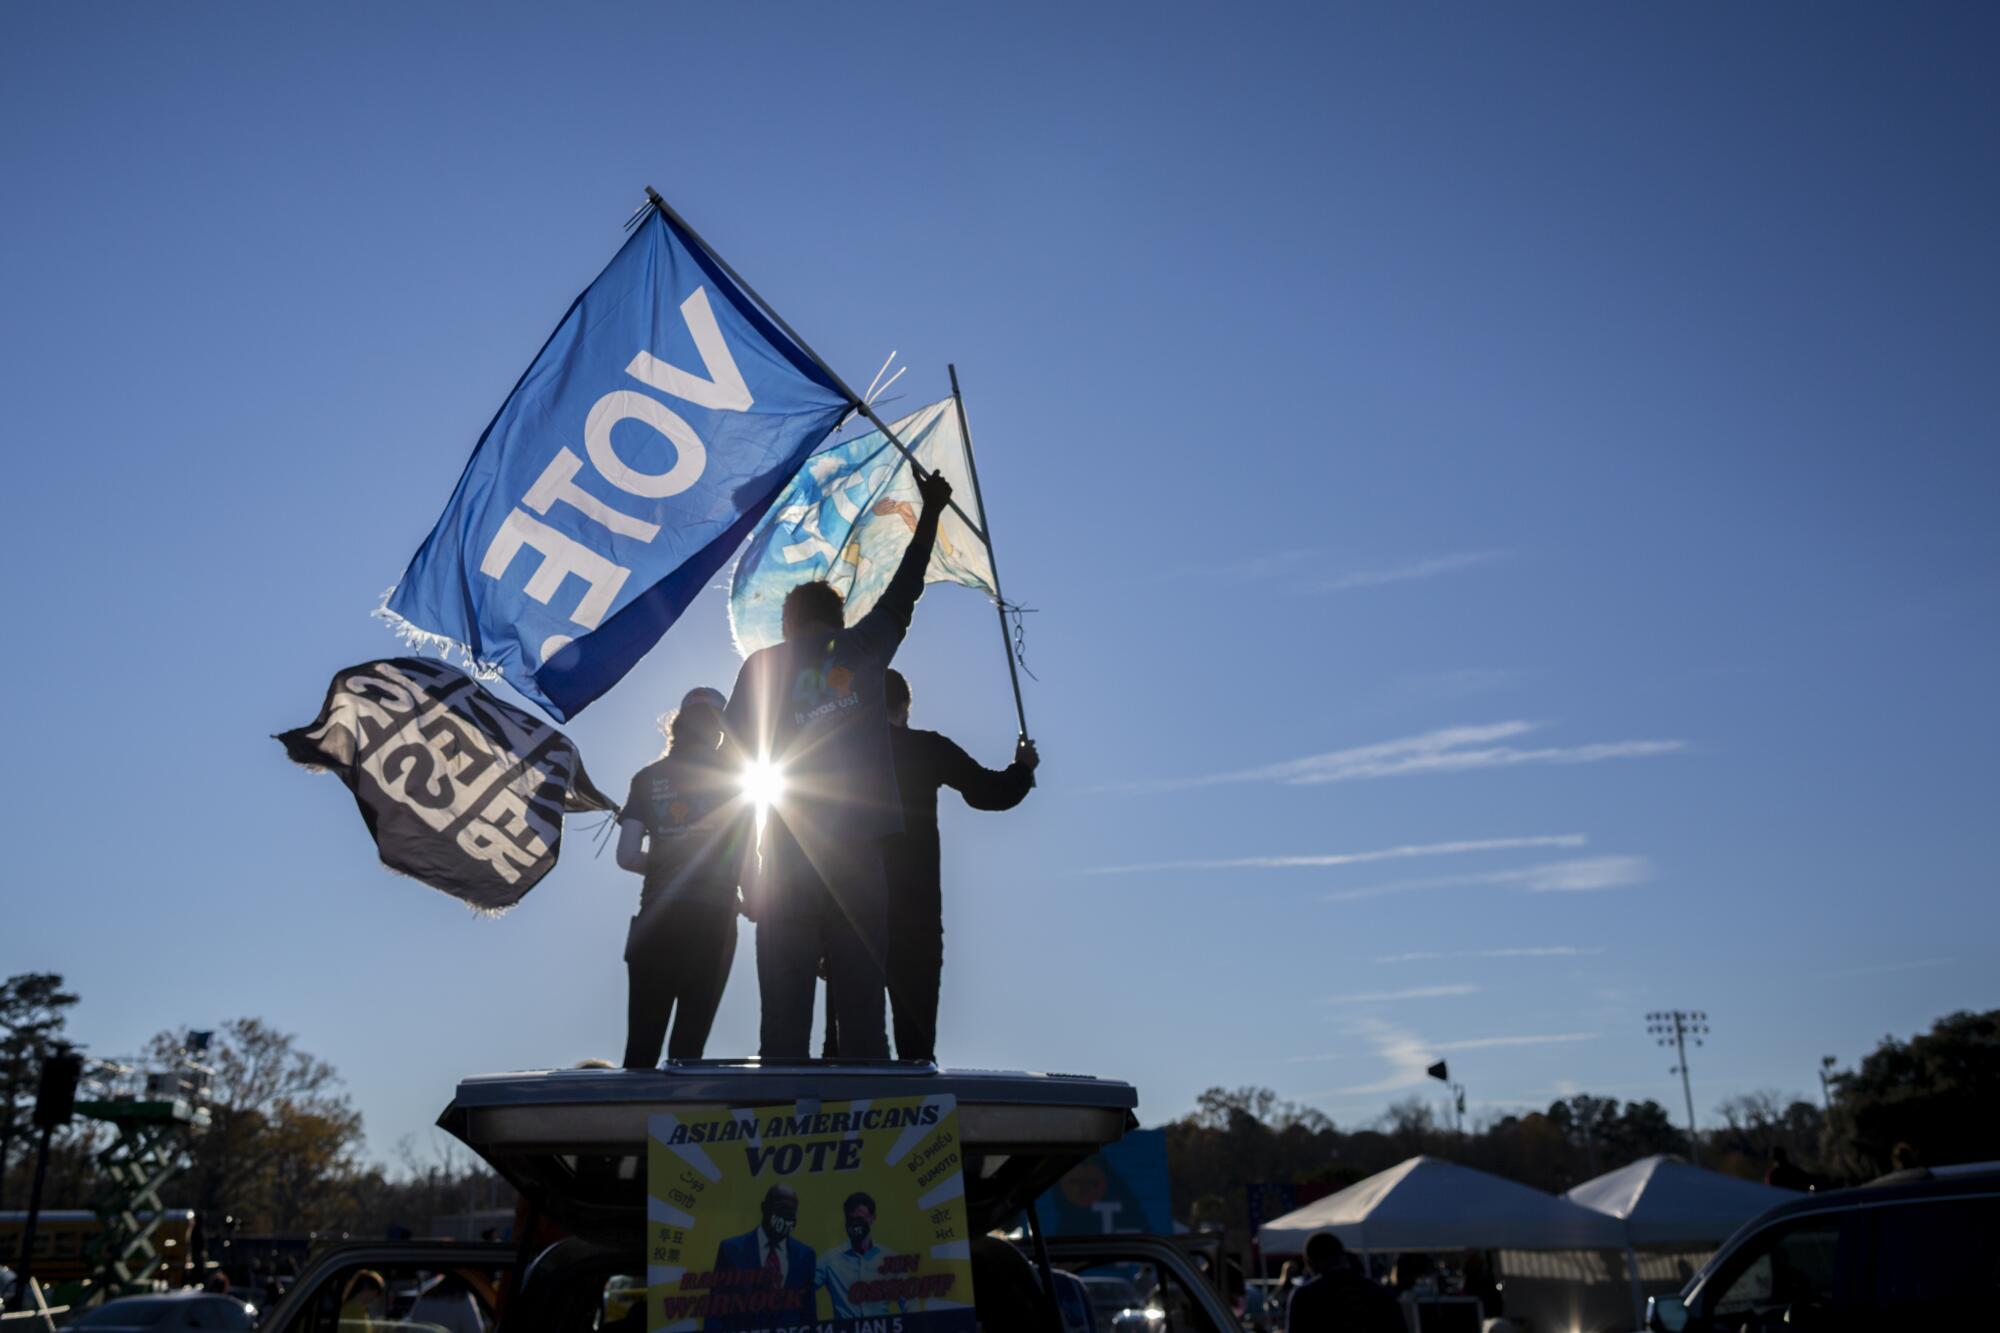 Sunshine casts three people in silhouette, illuminating flags they're waving that say "Vote" and "Black Lives Matter." 